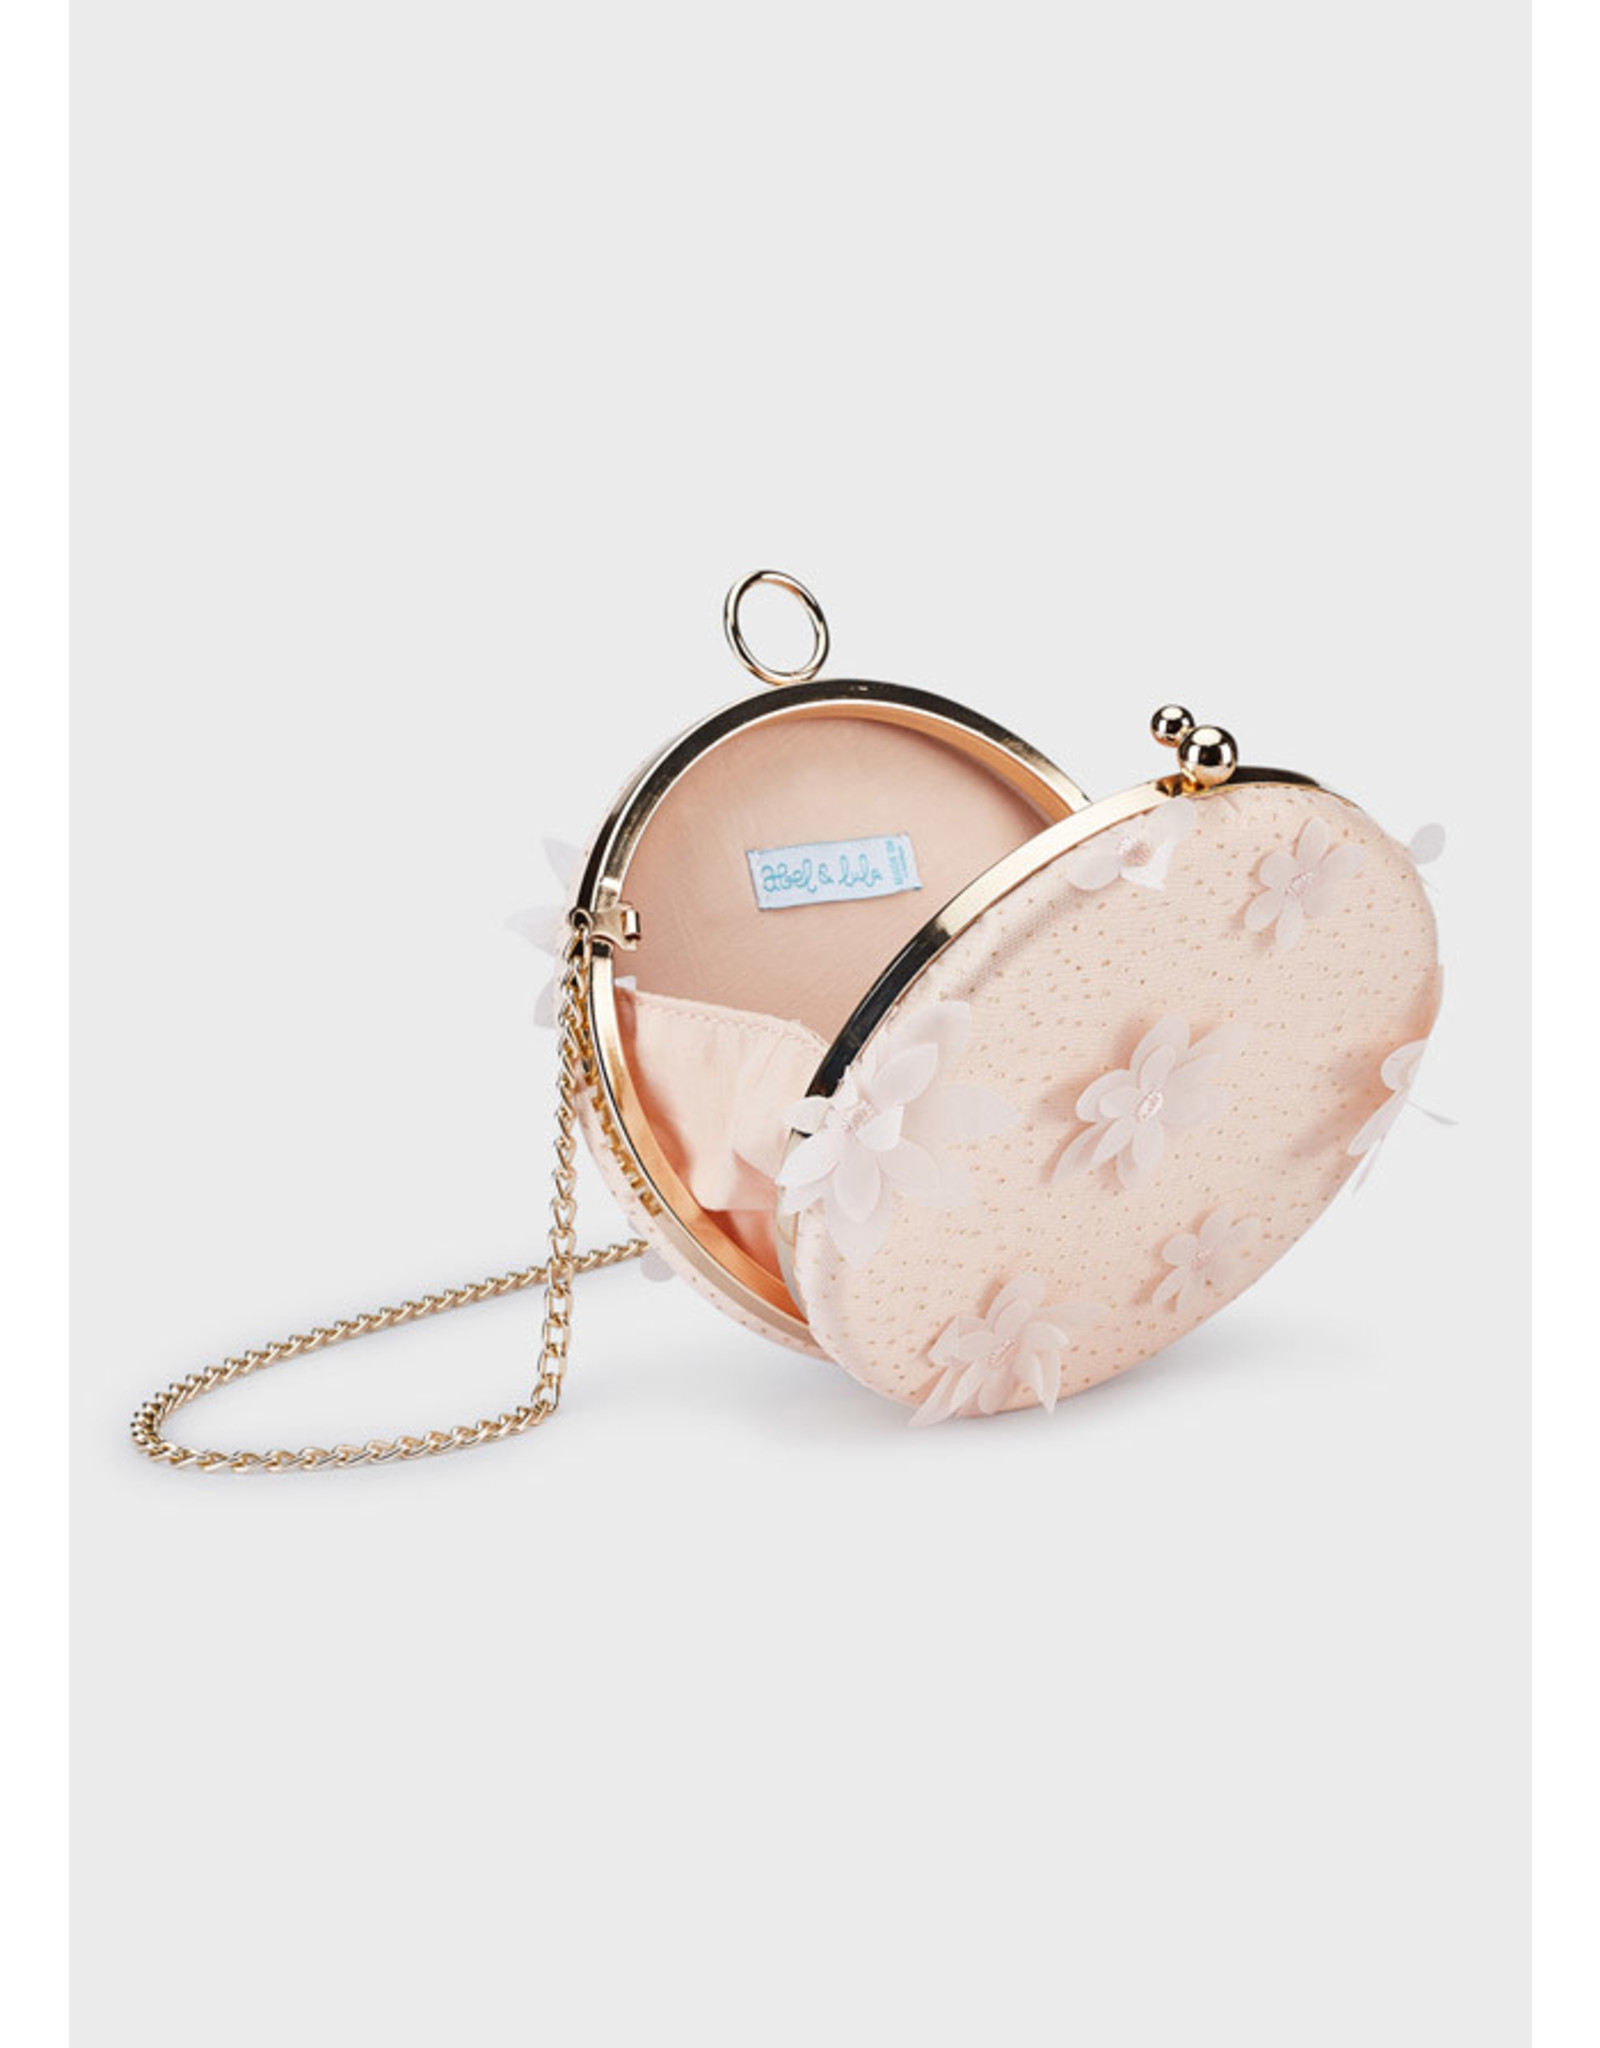 Abel & Lula Peach Embroidered Tulle Clutch